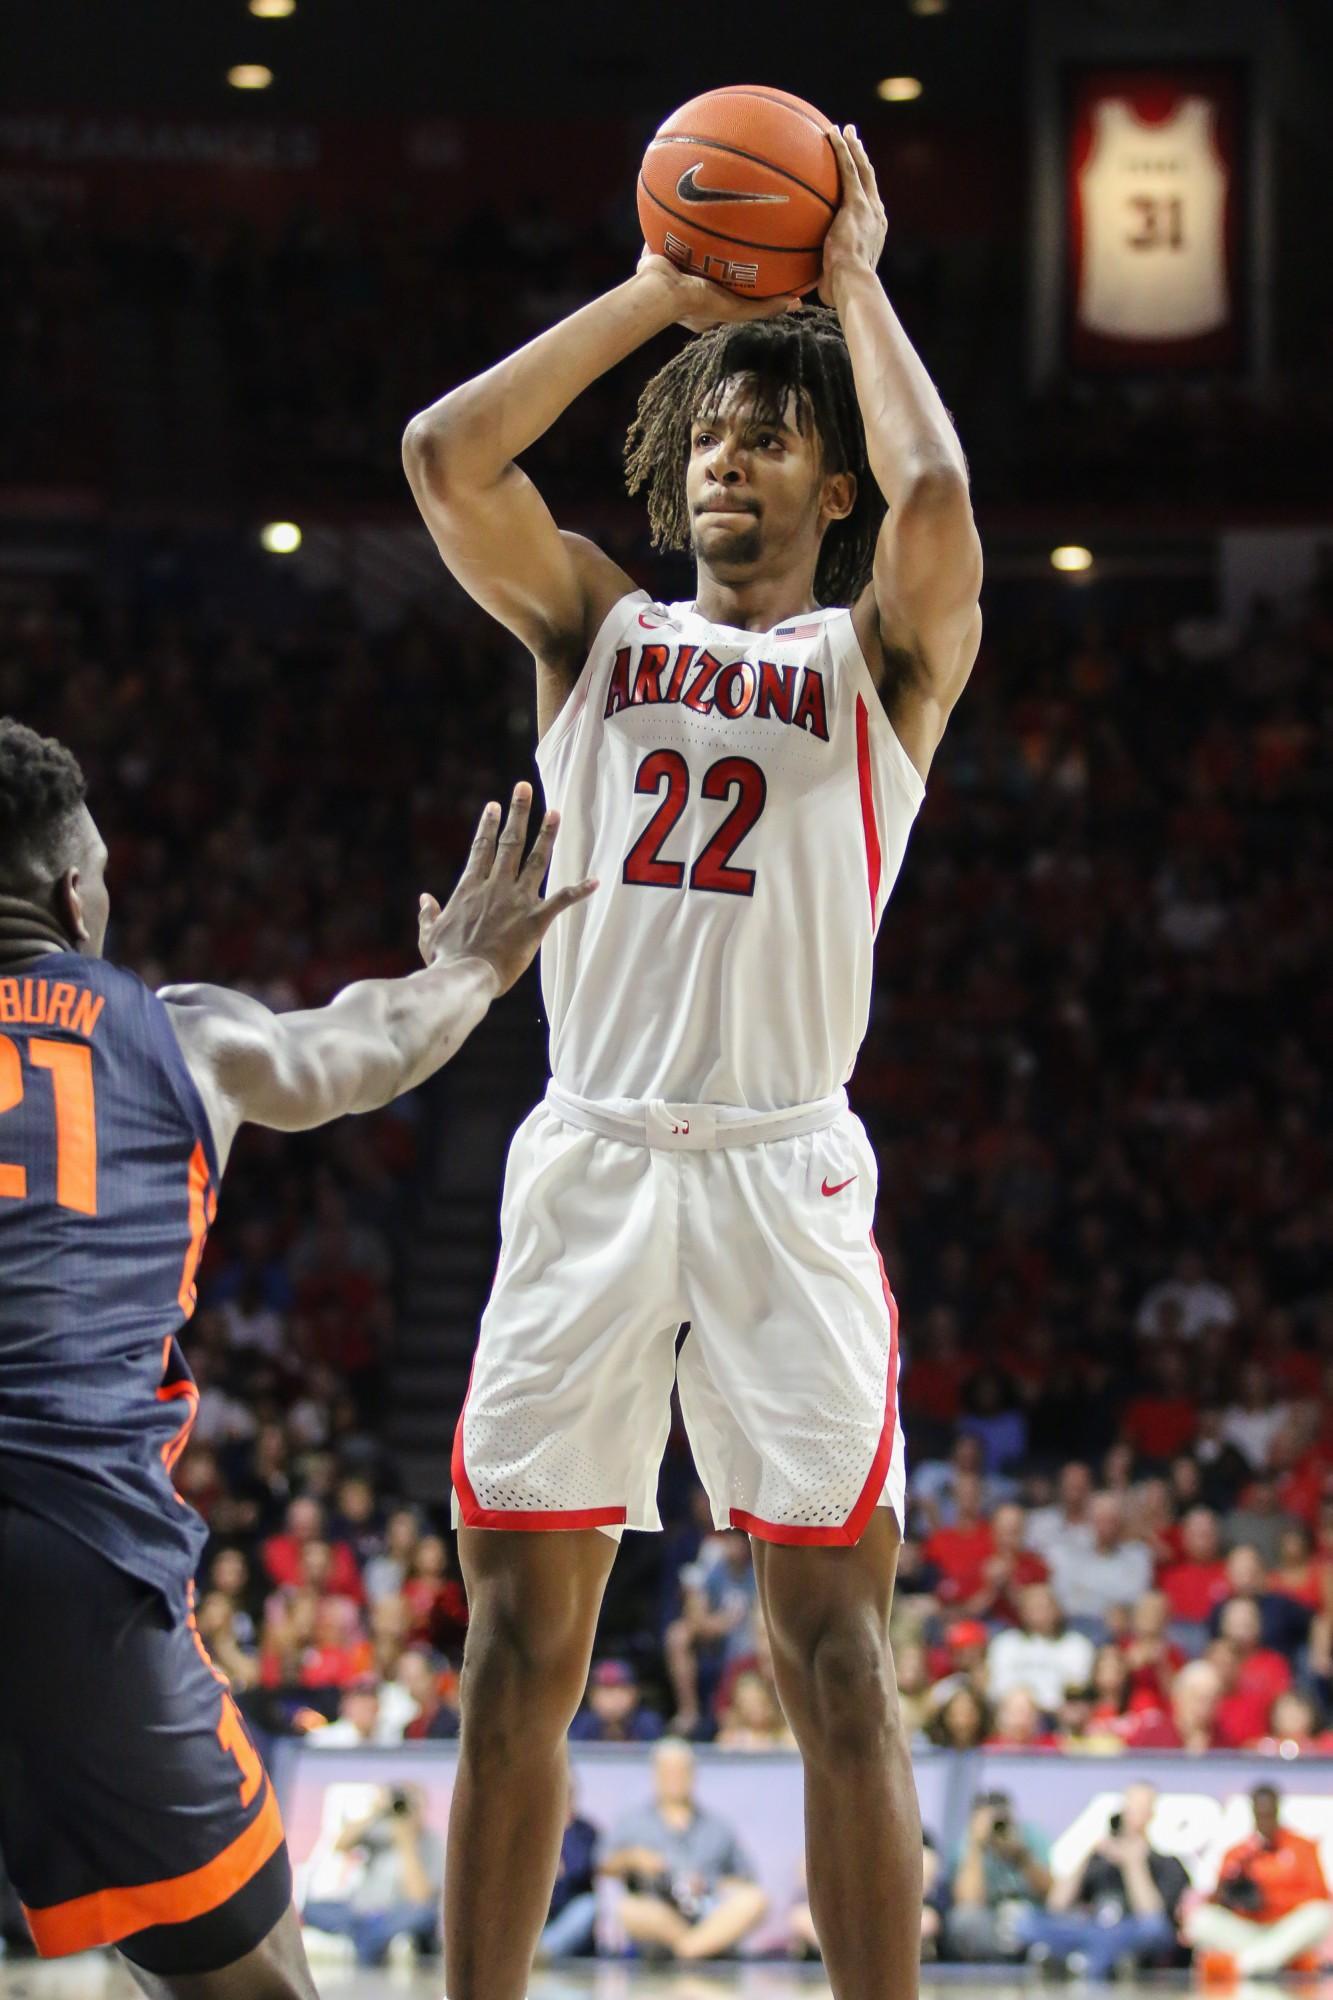 After catching the ball, Wildcat Zeke Nnaji (22) shoots the ball towards the basket and scores a three-pointer for Arizona. 